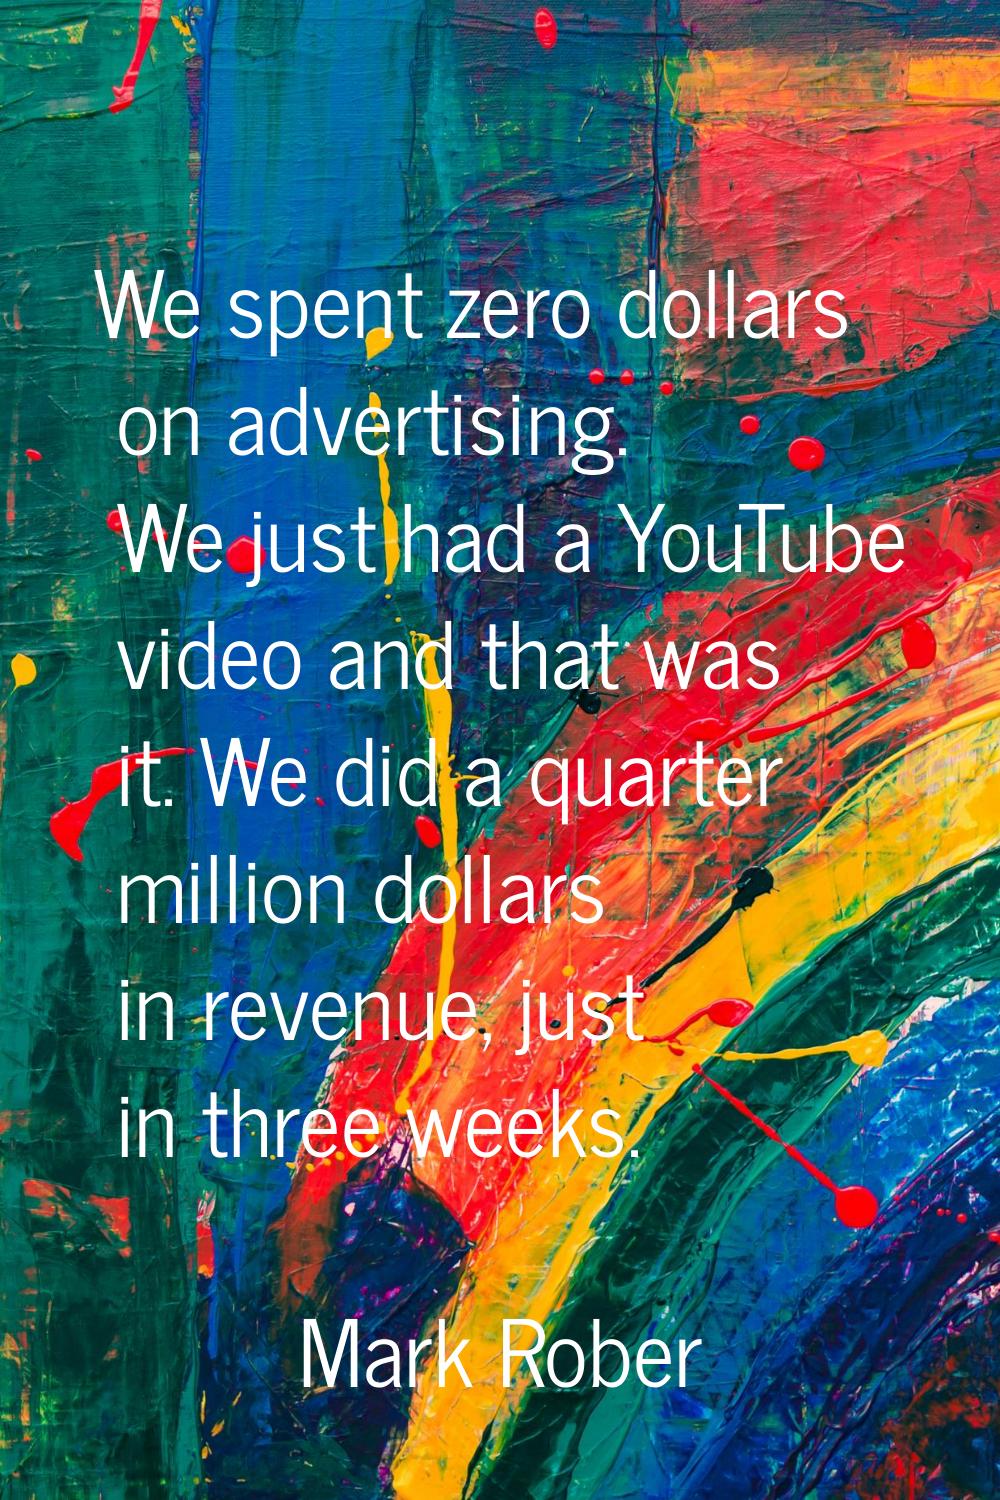 We spent zero dollars on advertising. We just had a YouTube video and that was it. We did a quarter